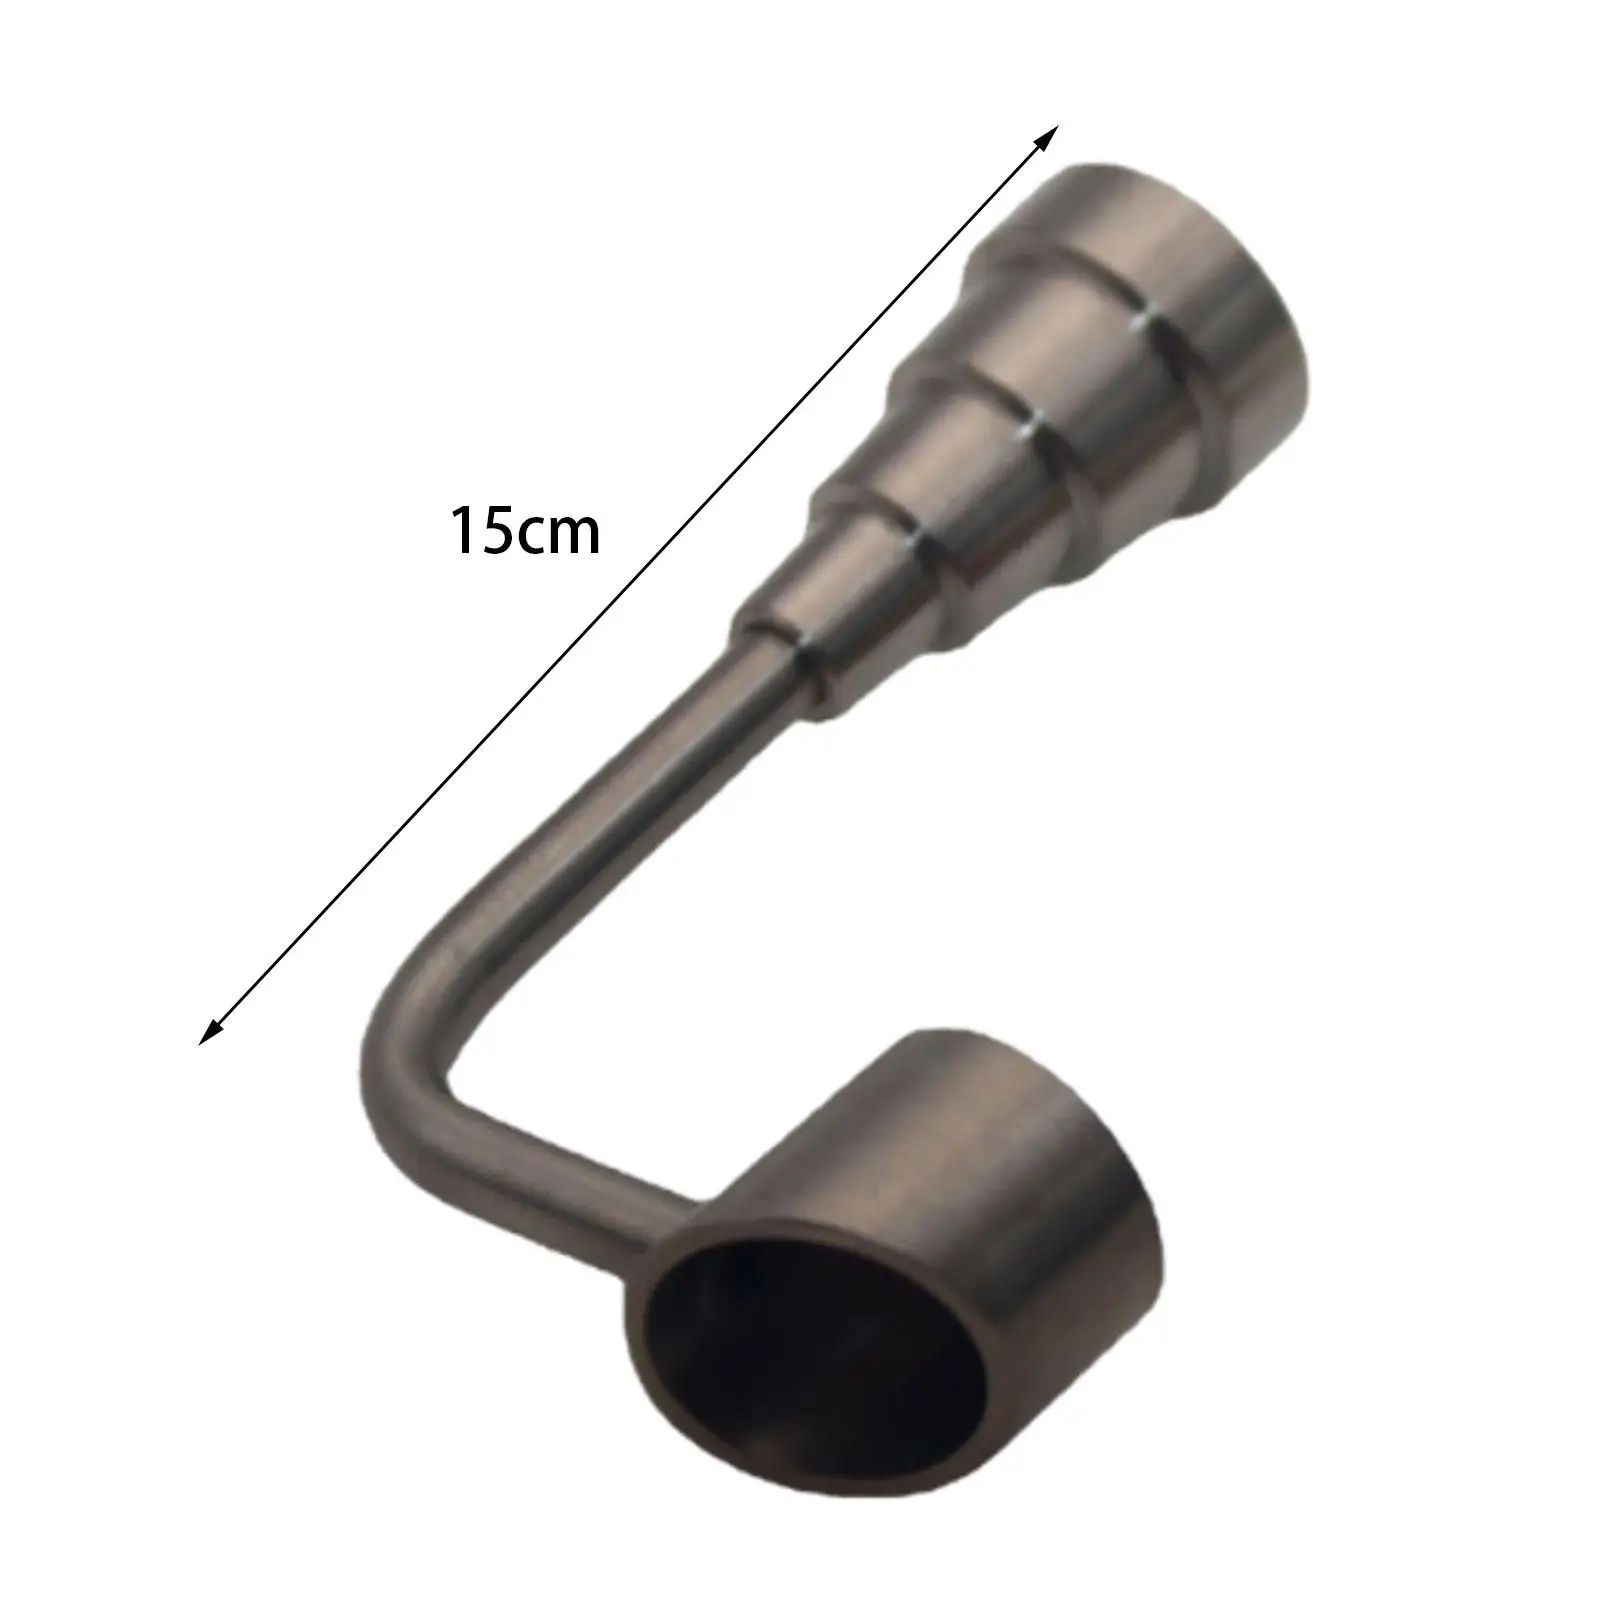 titanium tool, Male Female Joint Durable Portable Accessories Household Multifunctional Function Screw Domeless Titanium Nail,